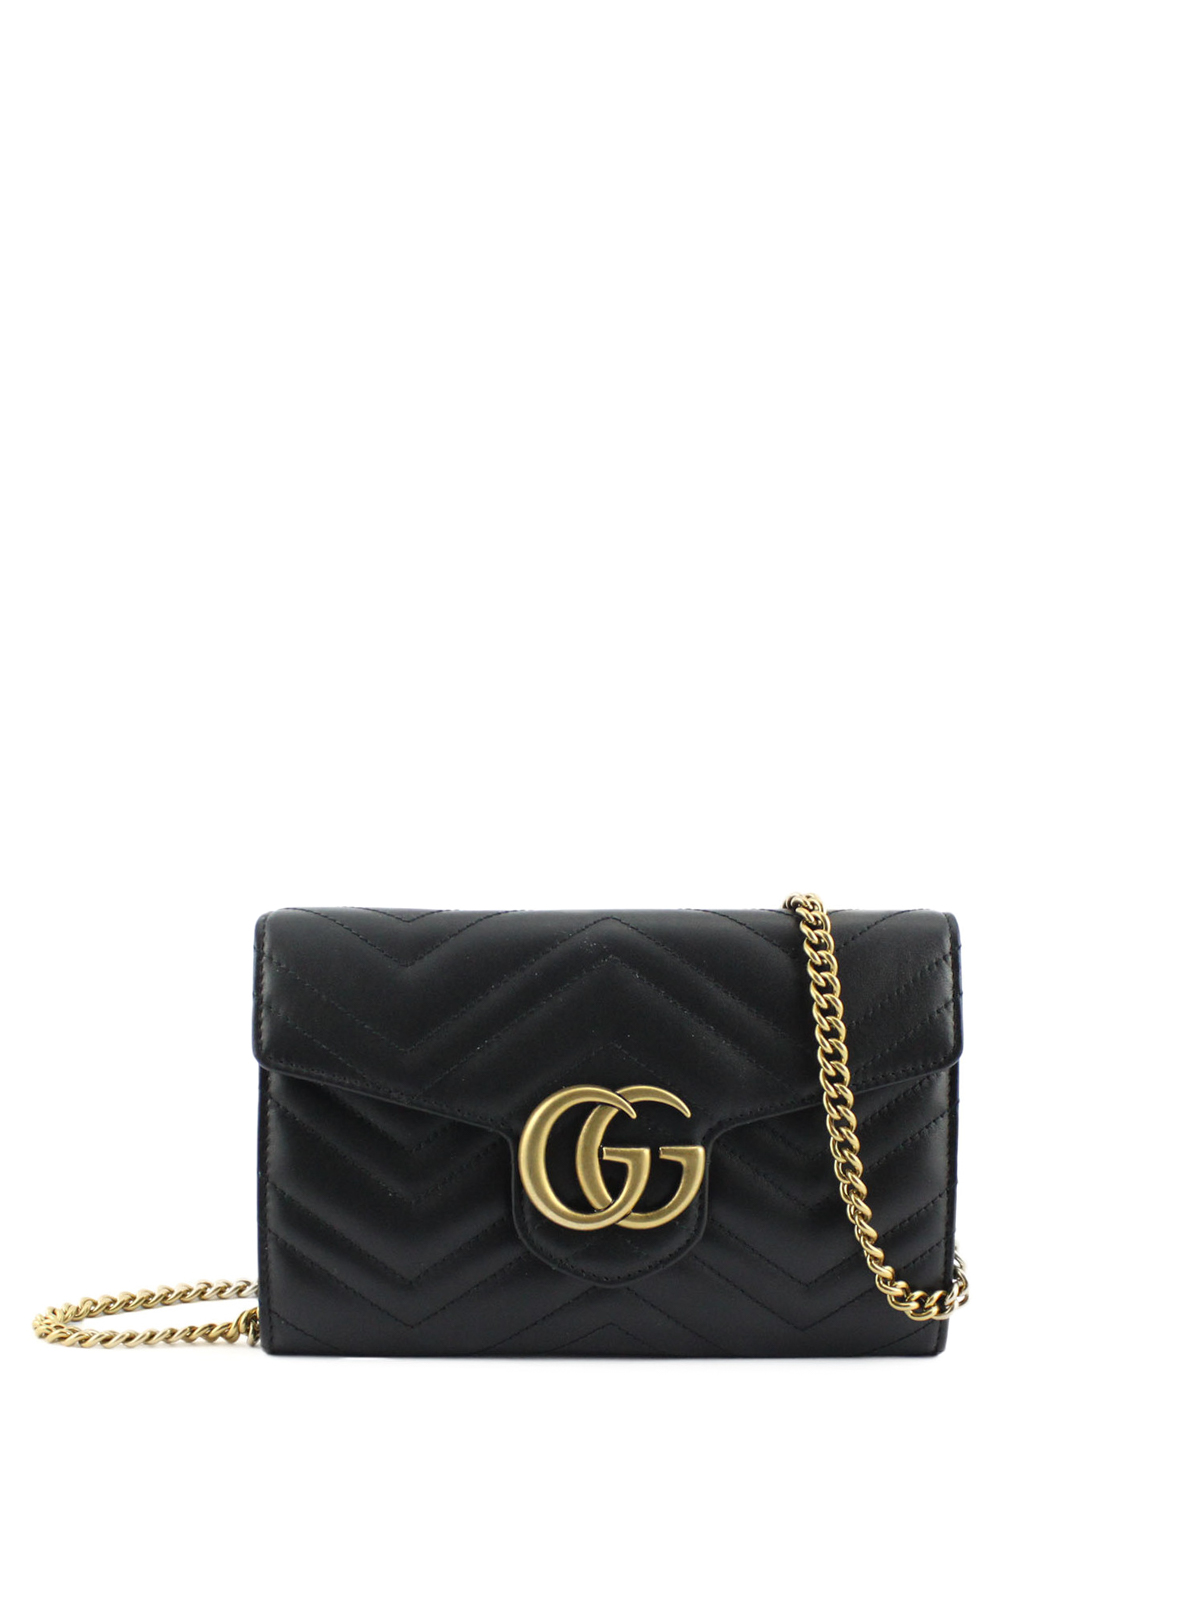 Gucci - GG Marmont quilted leather 